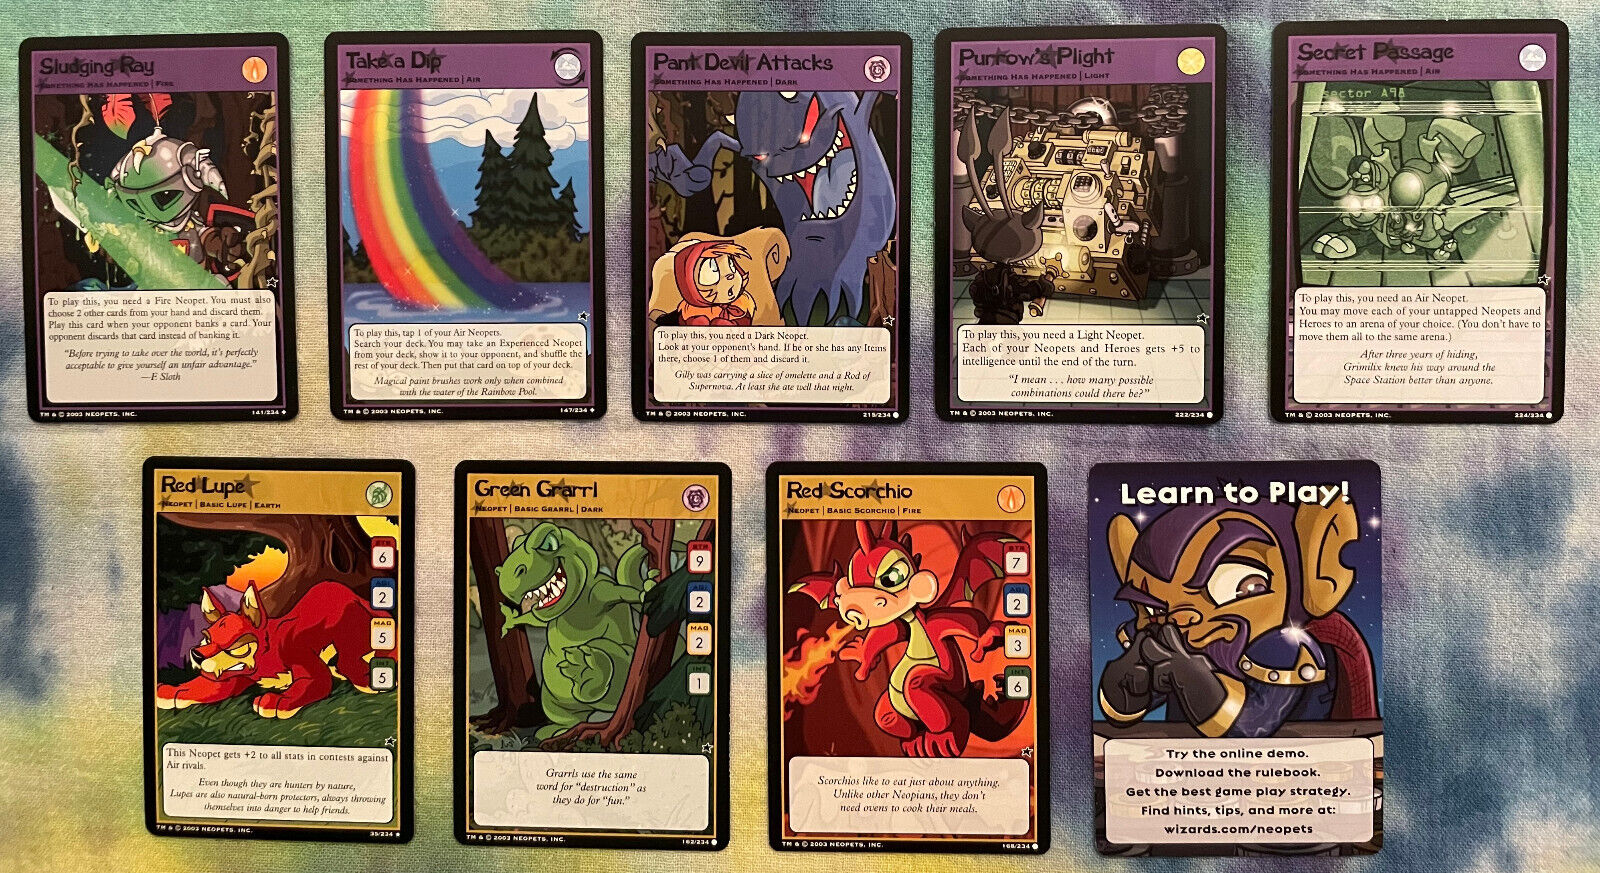 Lot of 9 NEOPETS 2003 TCG Purple and Yellow Cards from 234 Base set (see list)